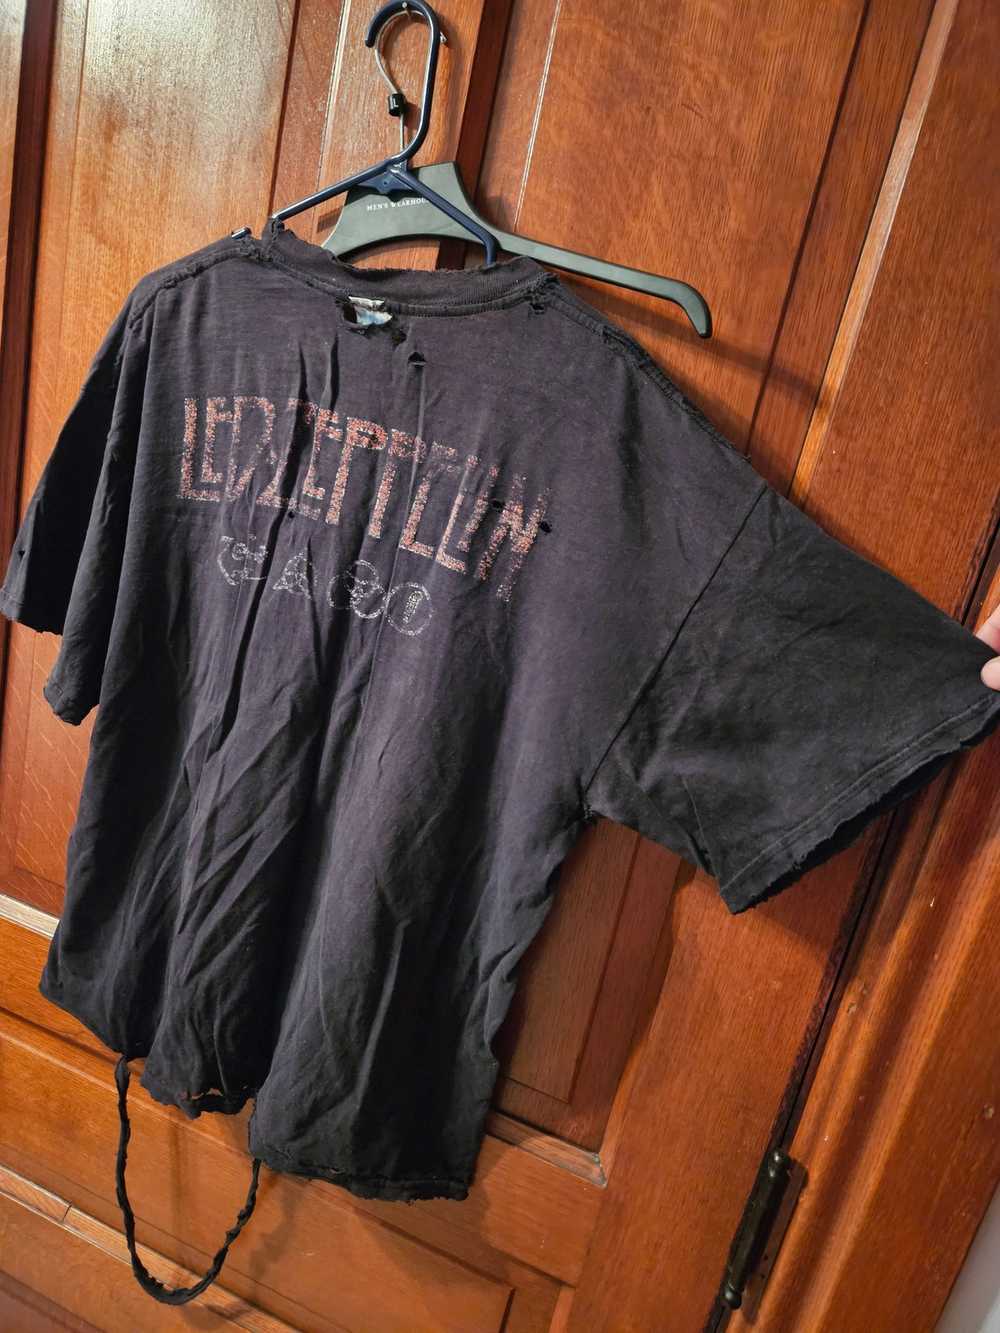 Led Zeppelin Stairway to heaven original shirt Le… - image 4